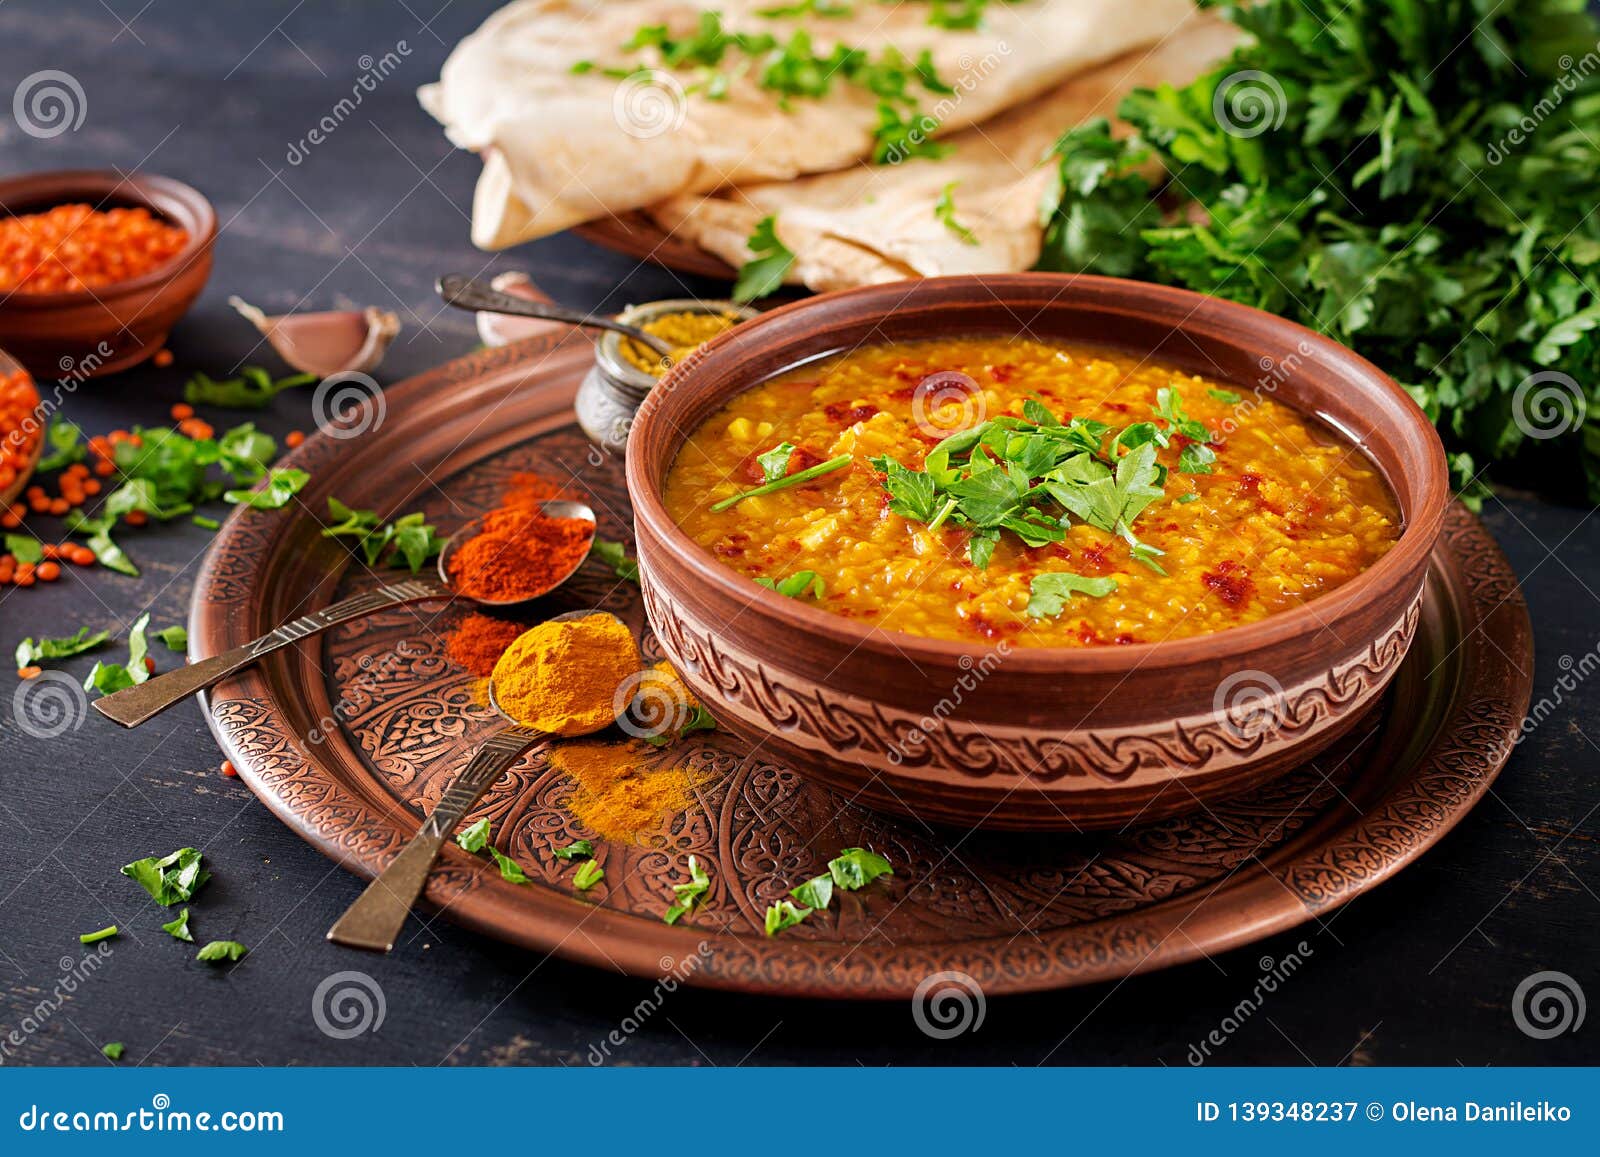 indian dal. traditional indian soup lentils.